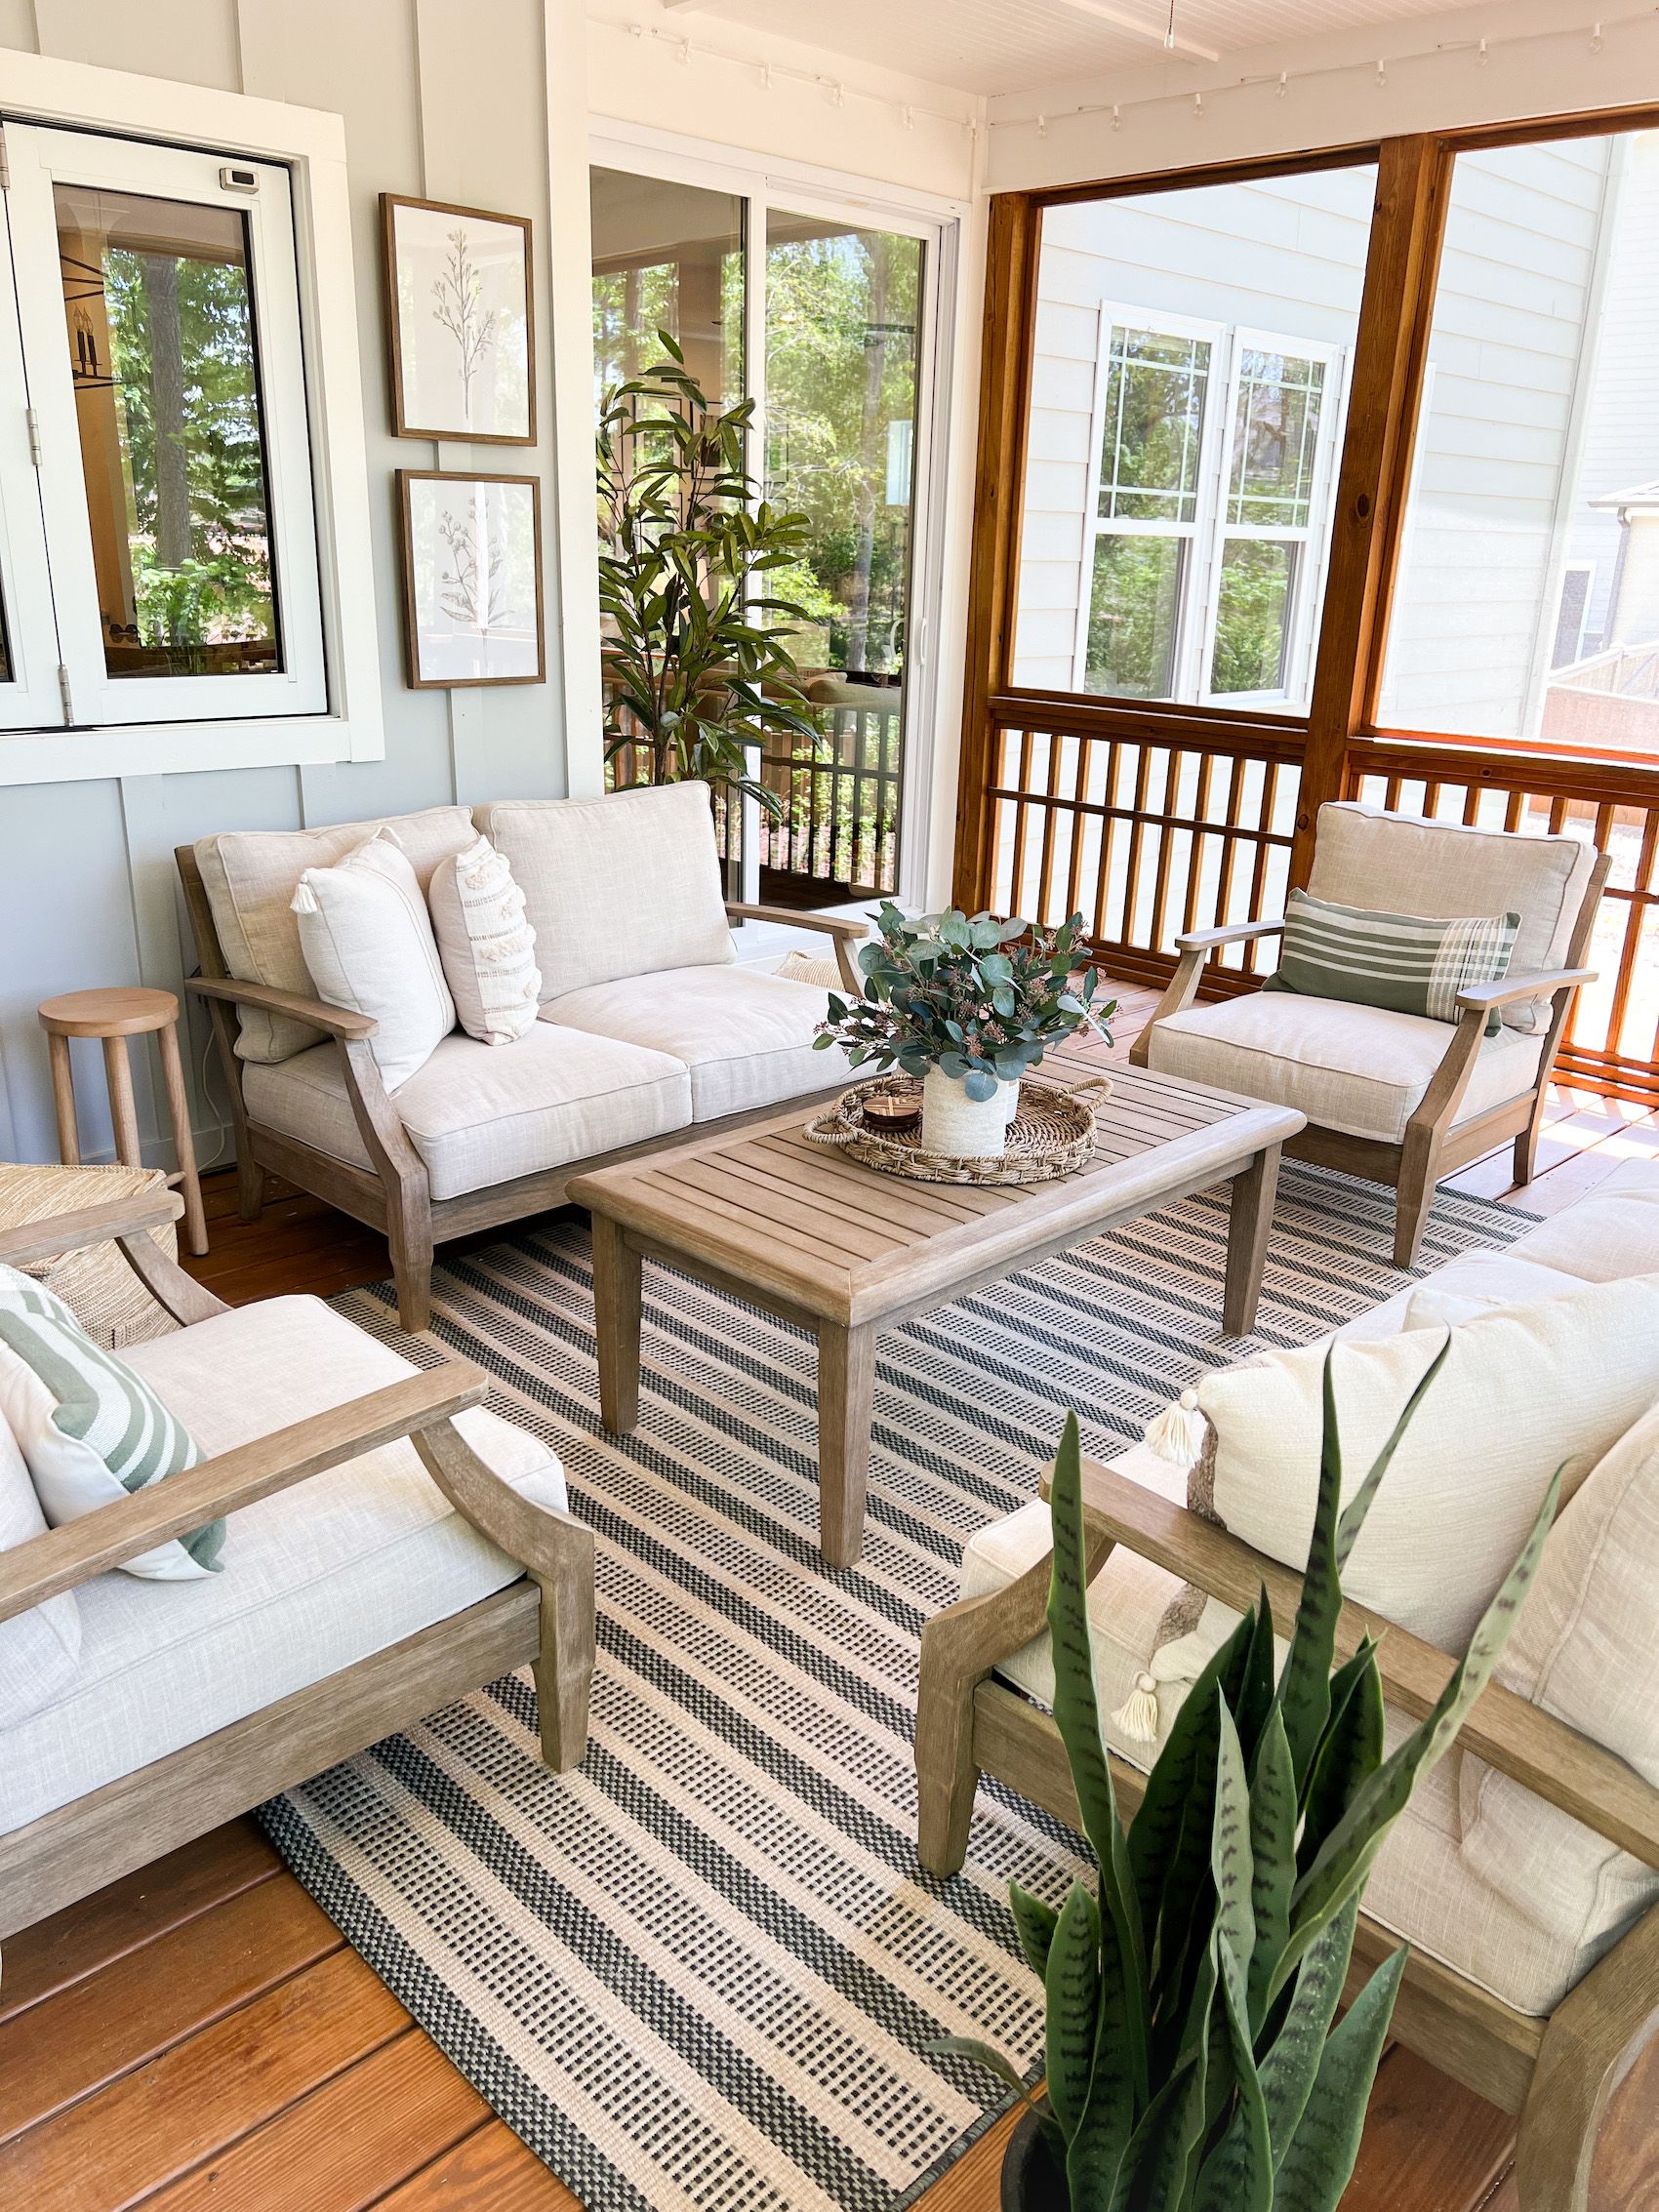 The Allure of a Spacious Screen Porch